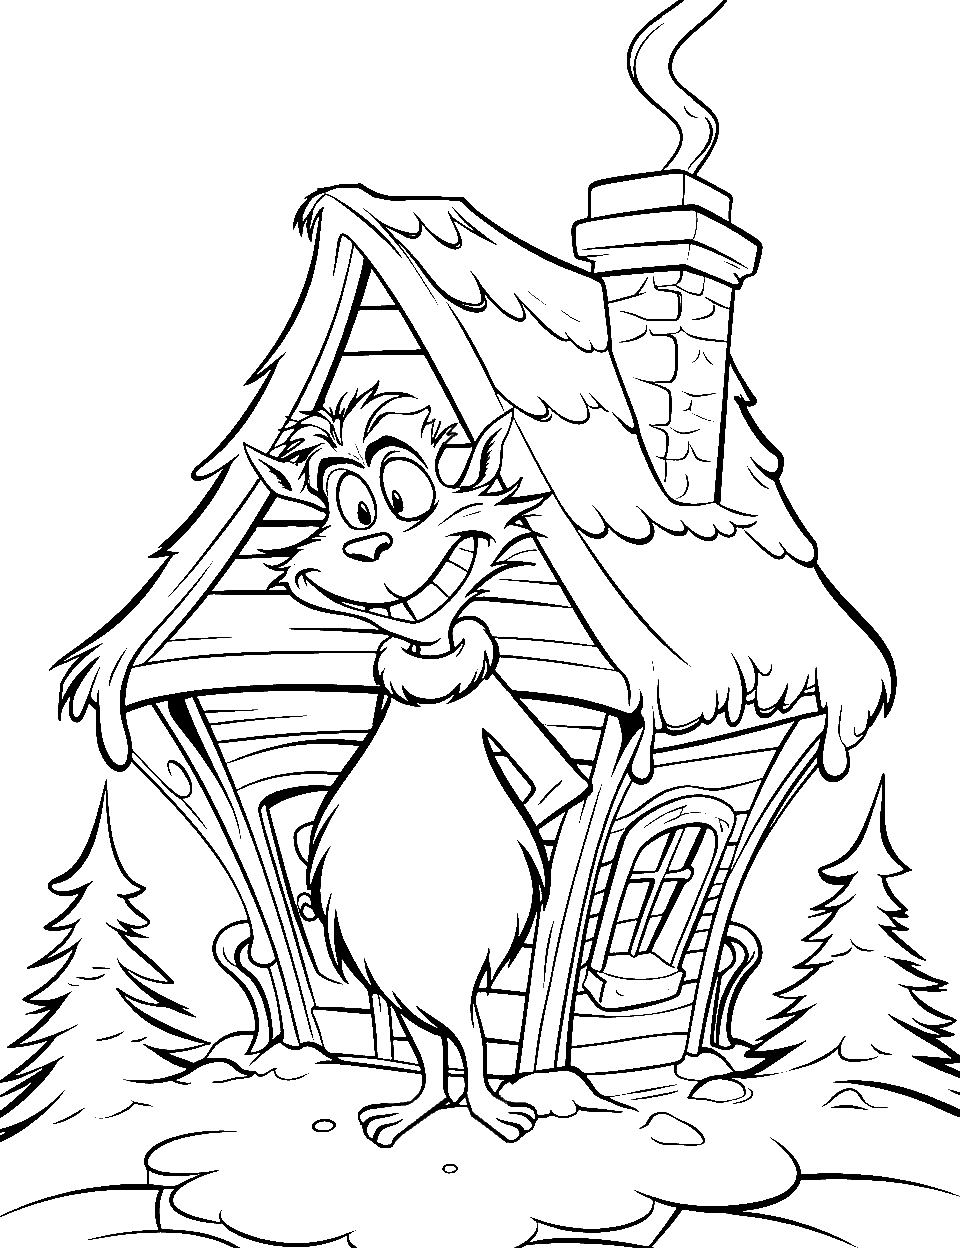 Grinch’s House Coloring Page - The Grinch is standing in front of his house on a snowy day.